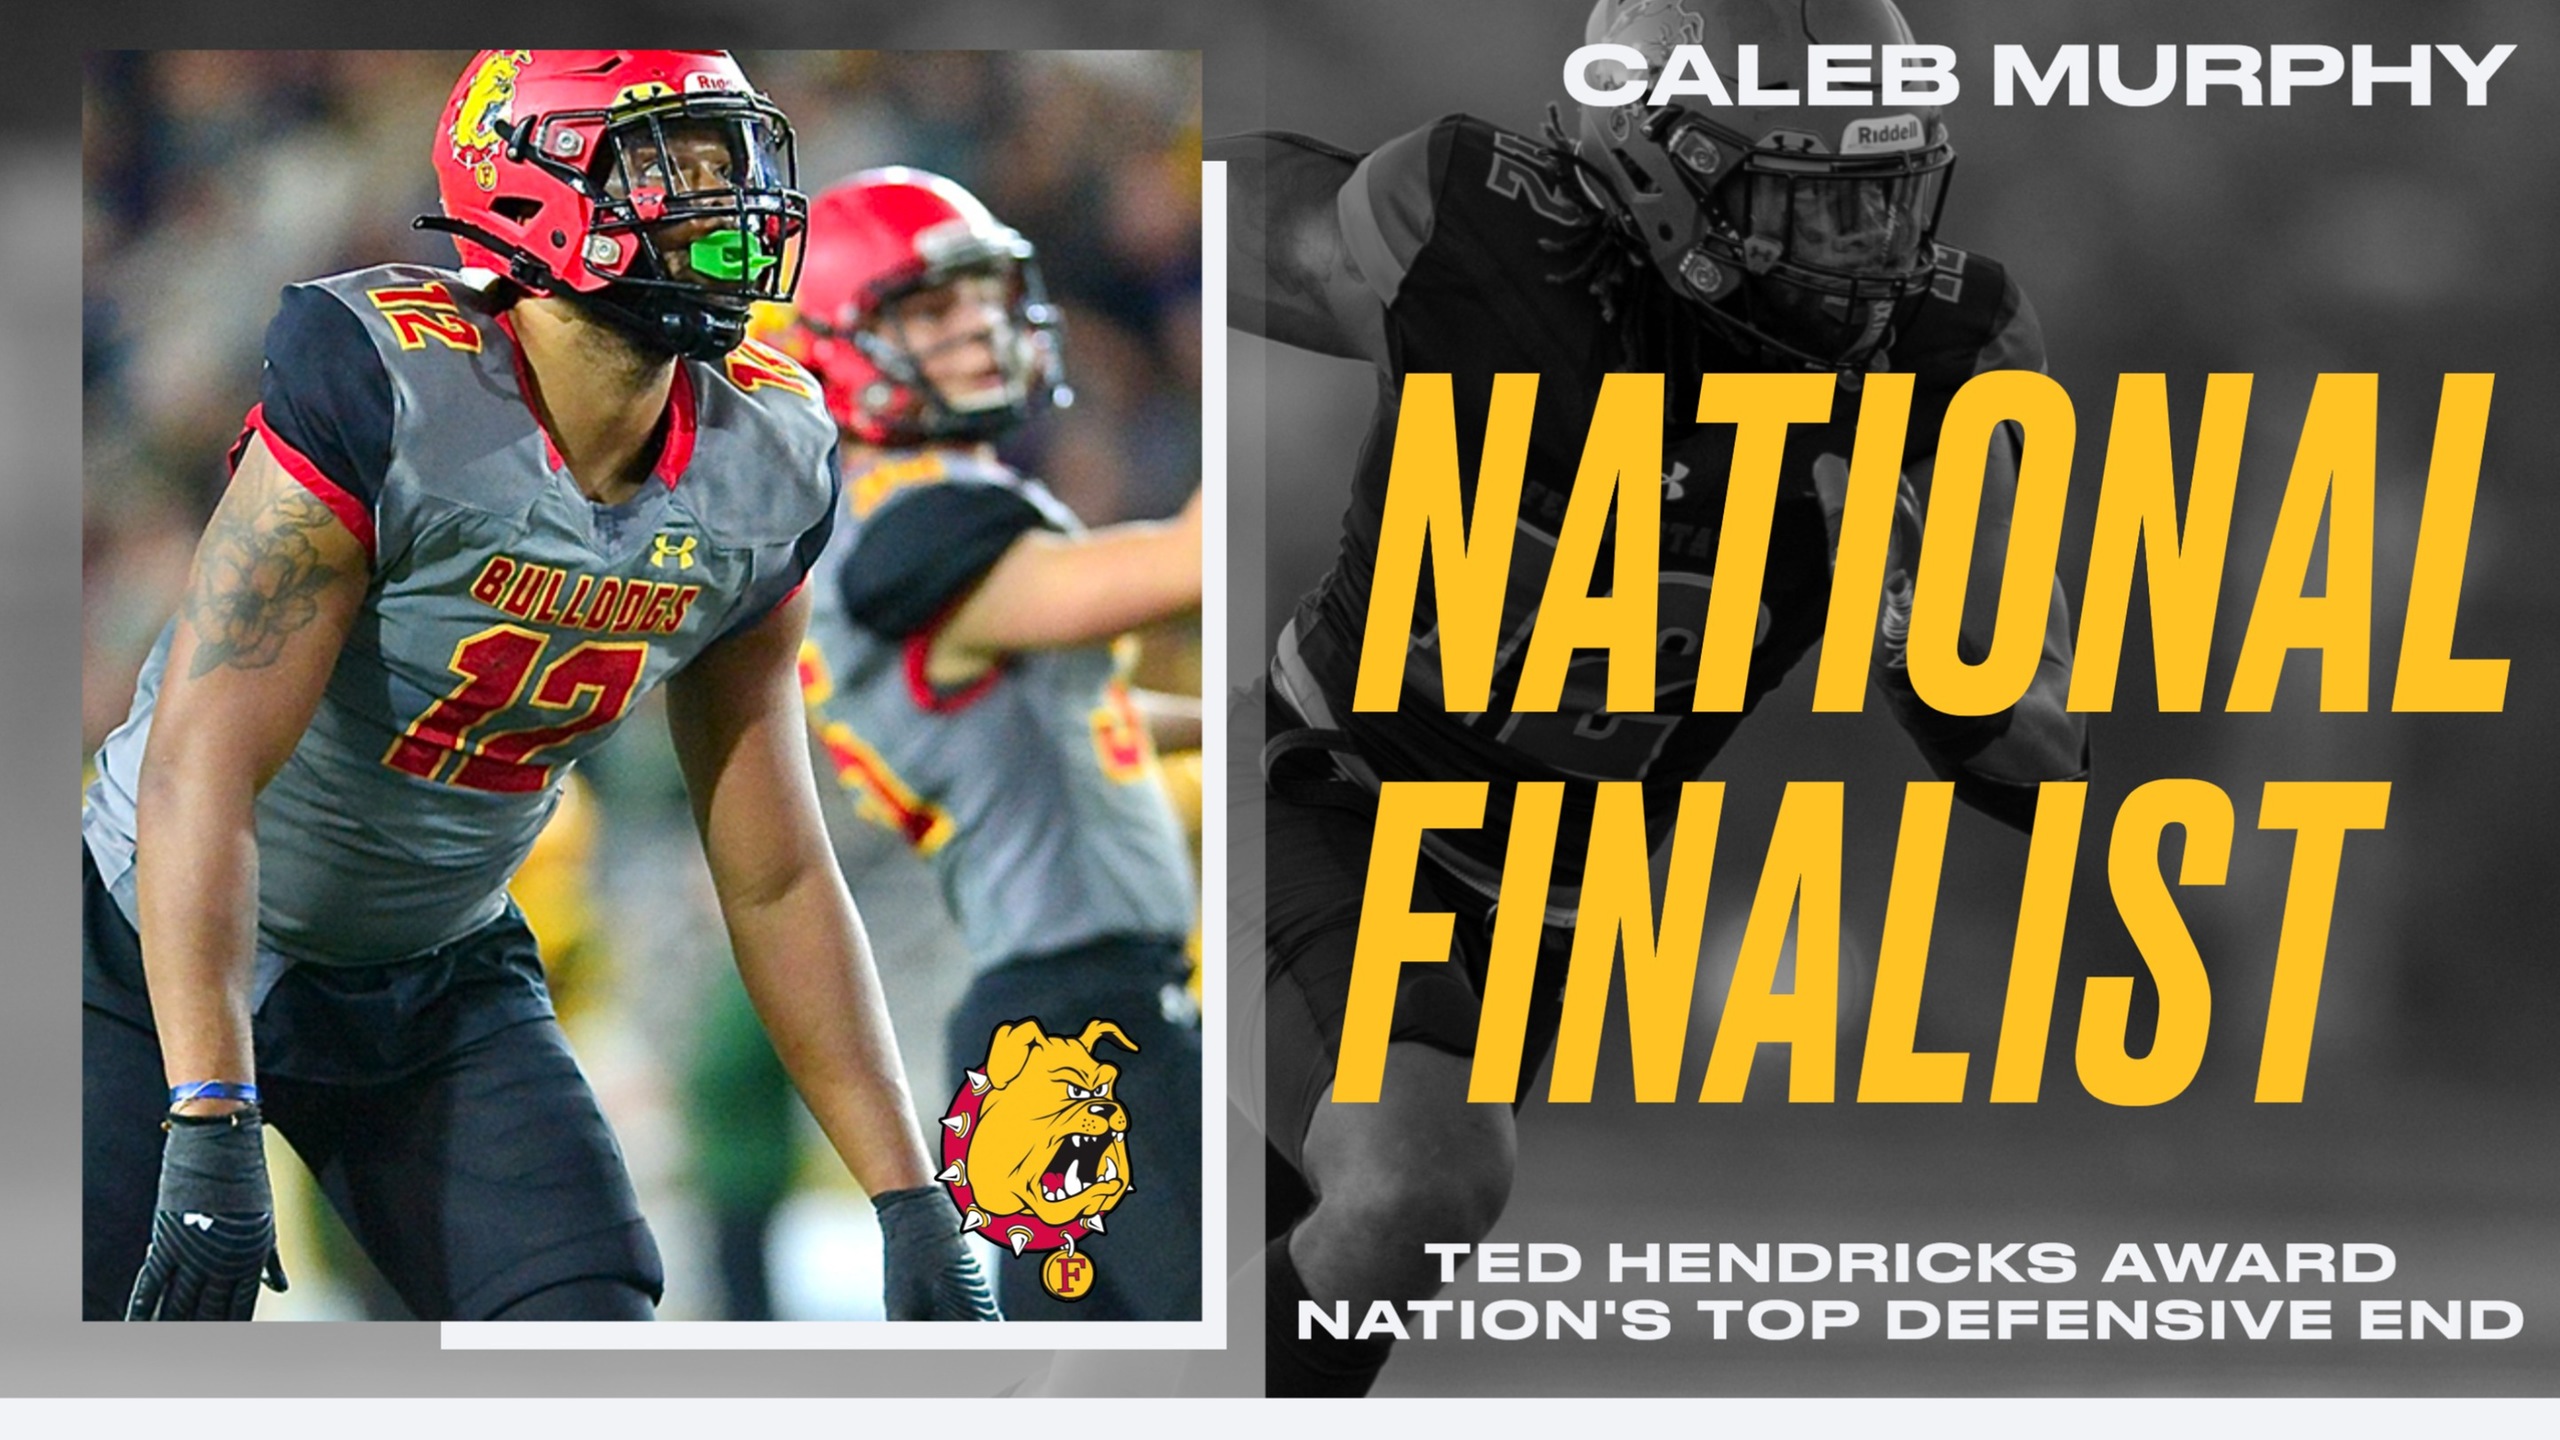 Ferris State's Caleb Murphy Tabbed National Finalist For Ted Hendricks Award As Top Defensive End In College Football